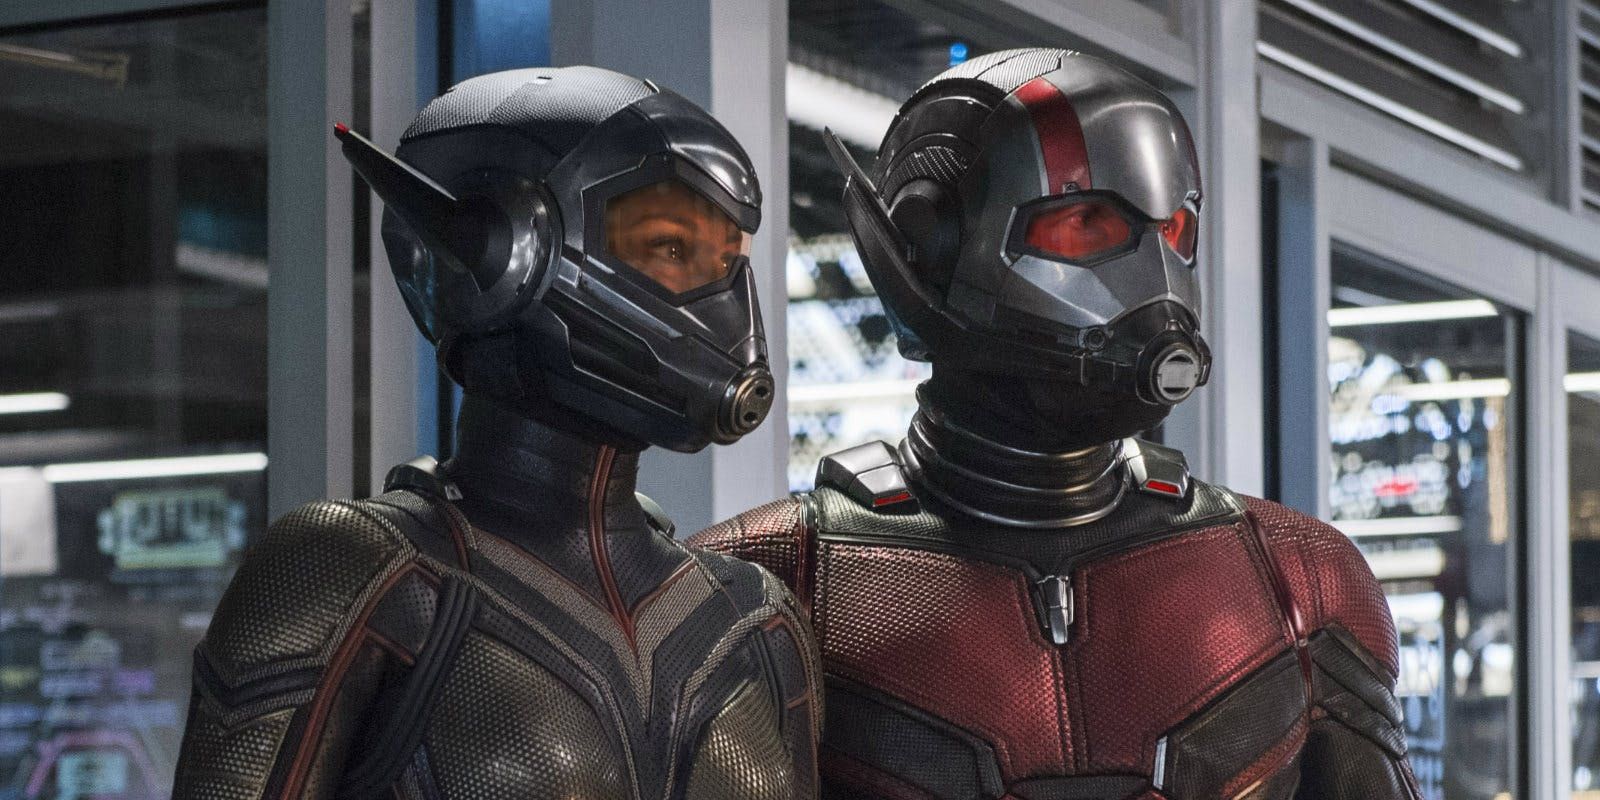 Ant-Man and the Wasp suited up next to each other